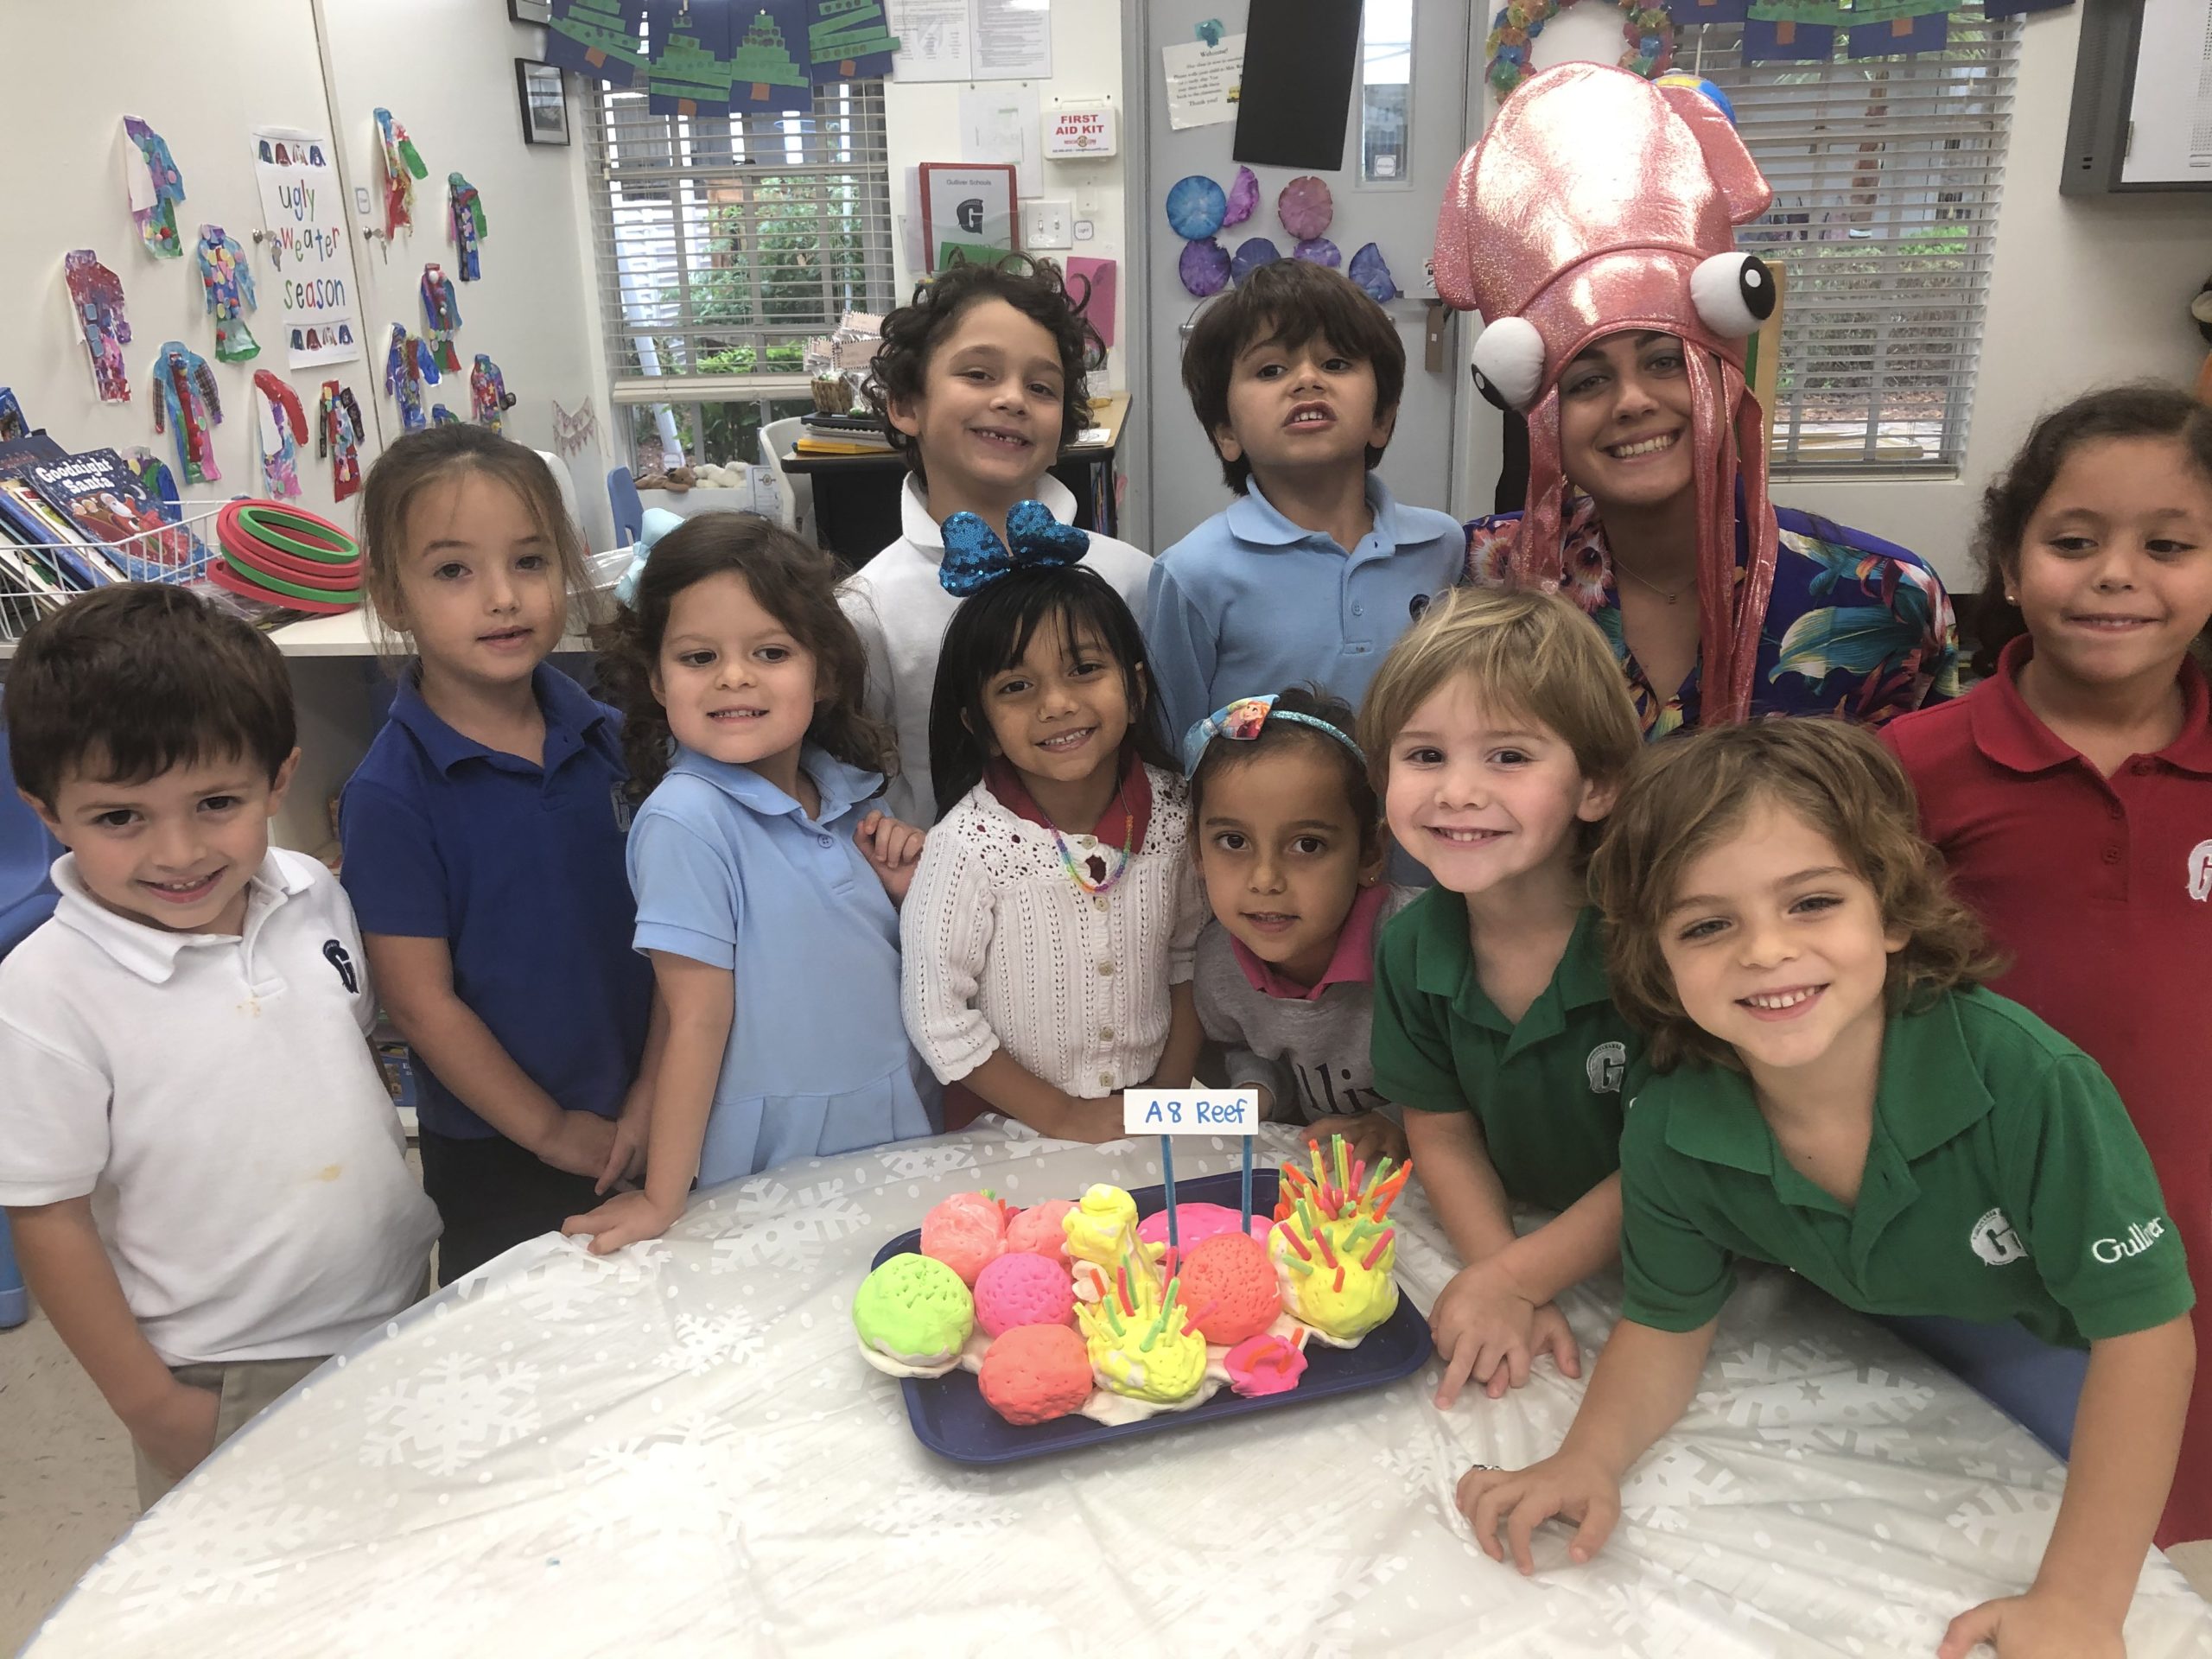 In Jr.K's Creative Curriculum, students are taking an imaginary trip around the globe, learning about different cultures.